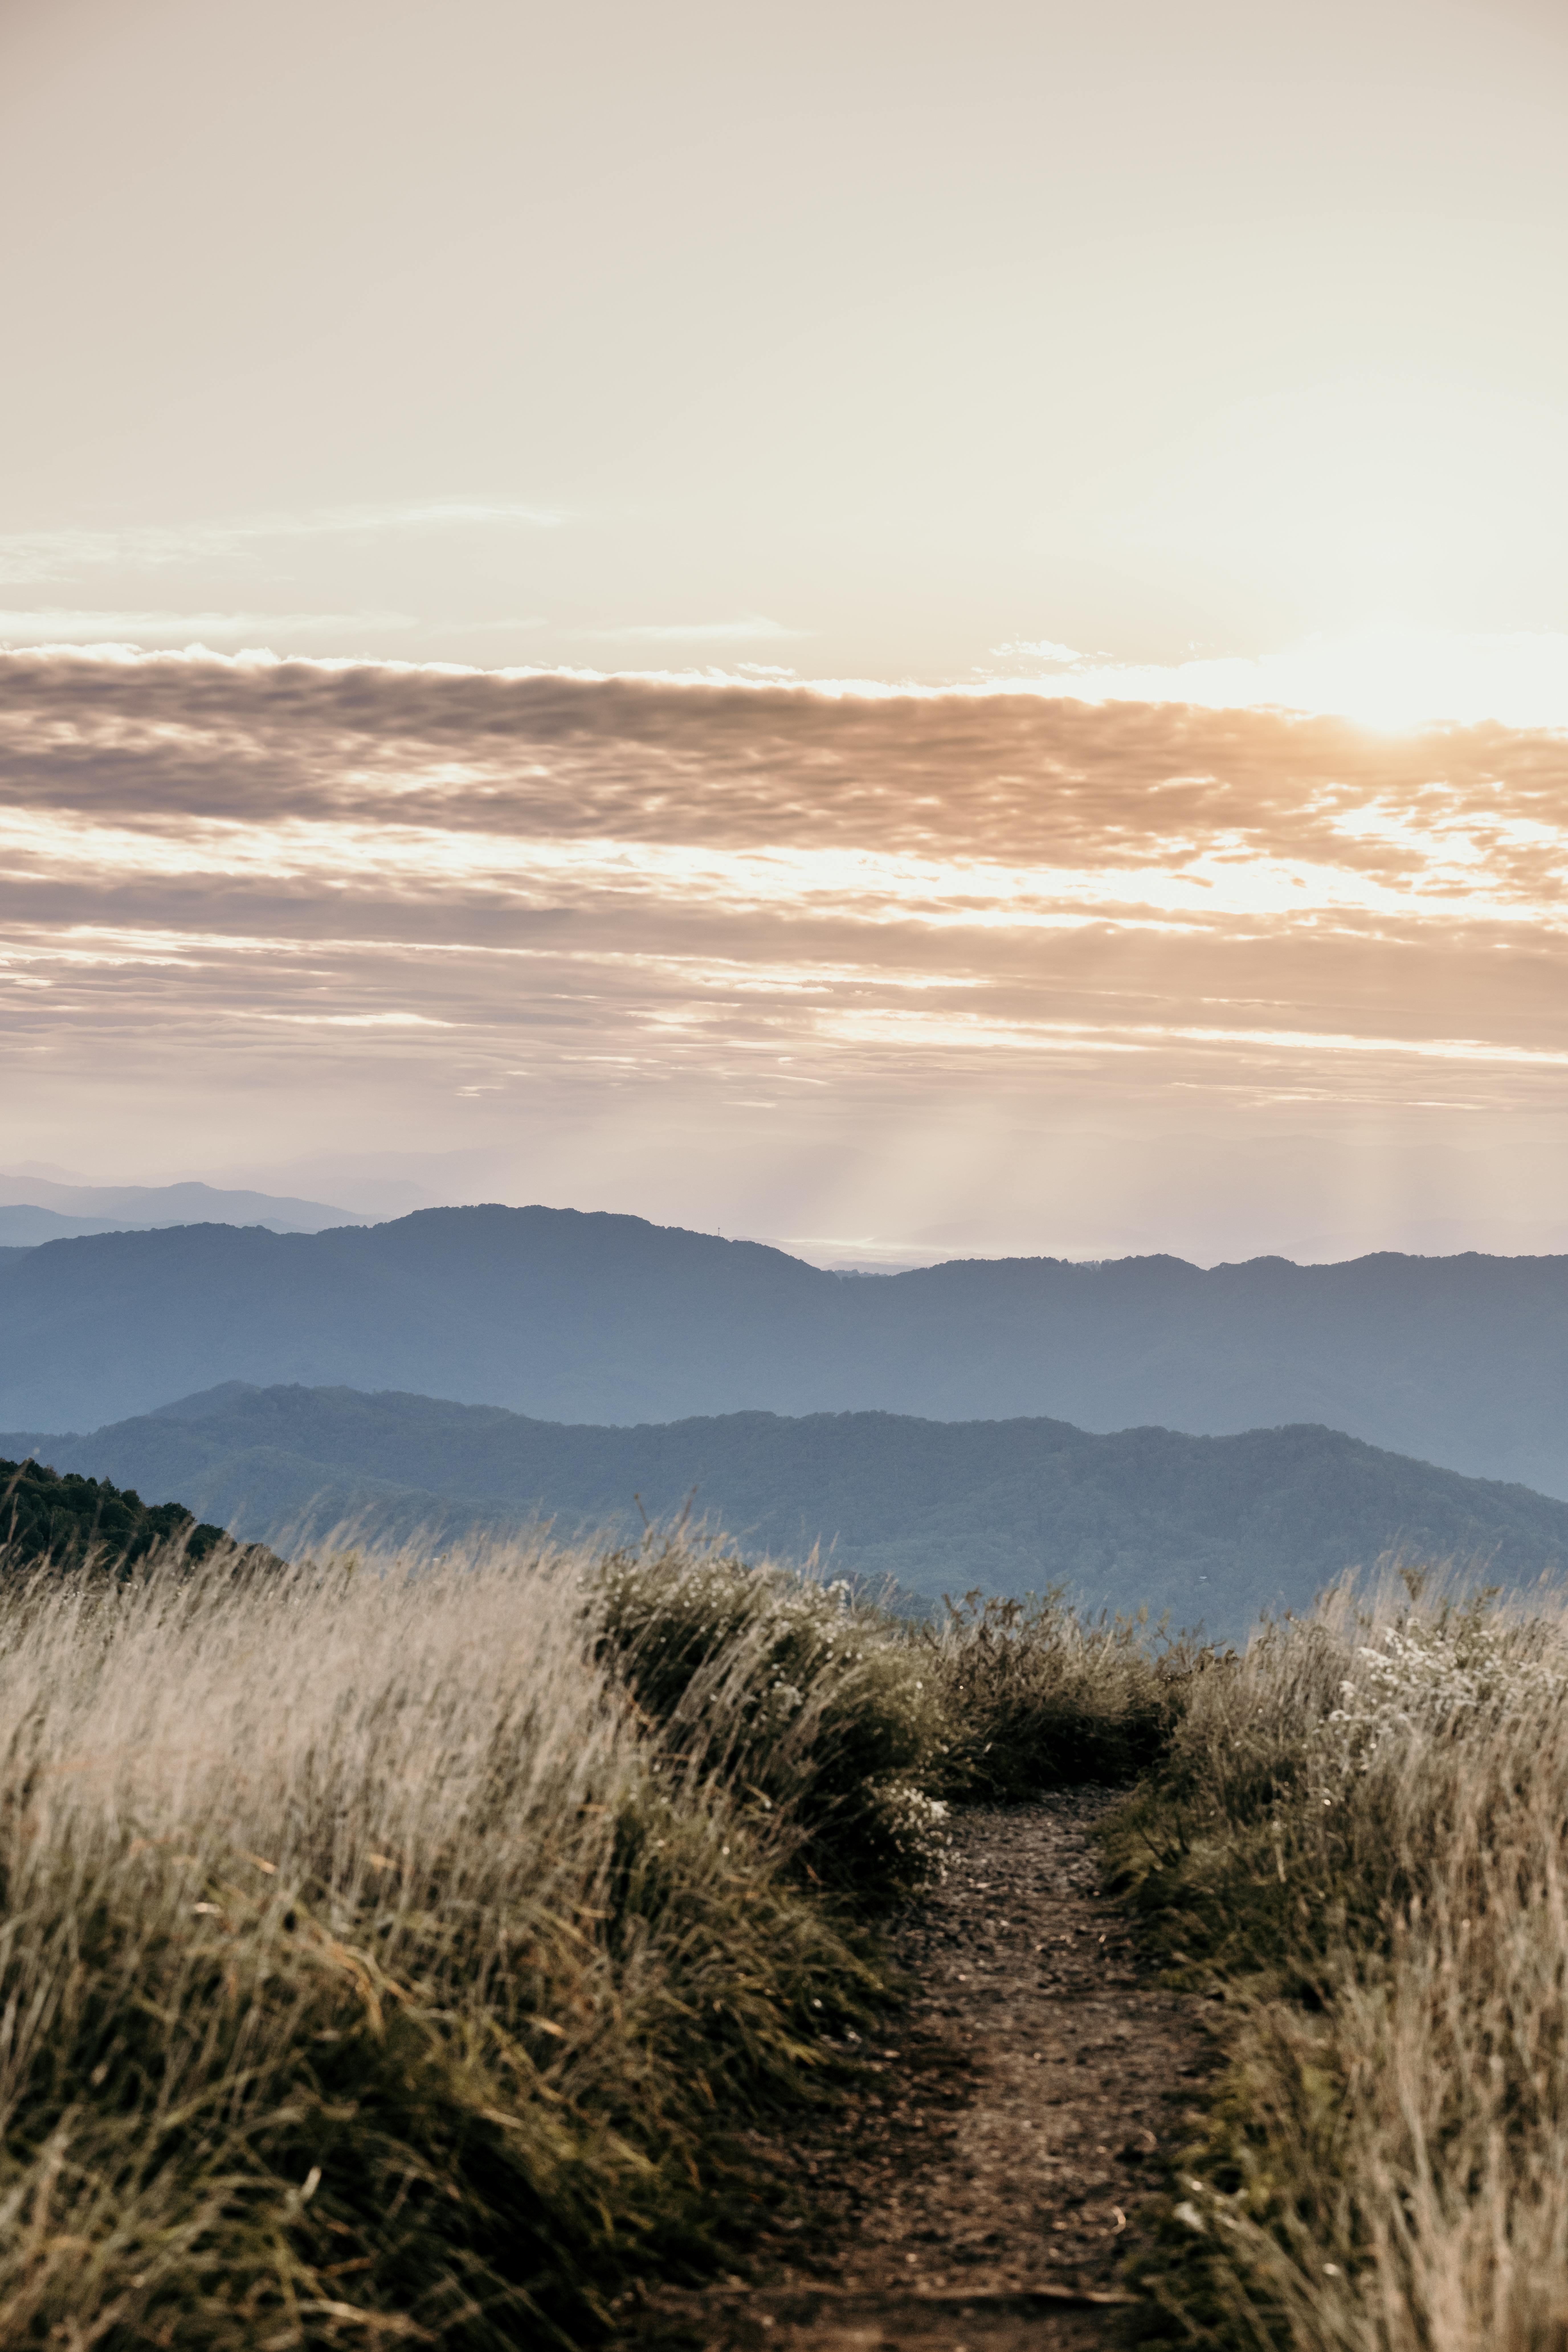 Mountains, fields, sunrise, couples photography, mountaintop, tall grass, dirt path, best photo locations.